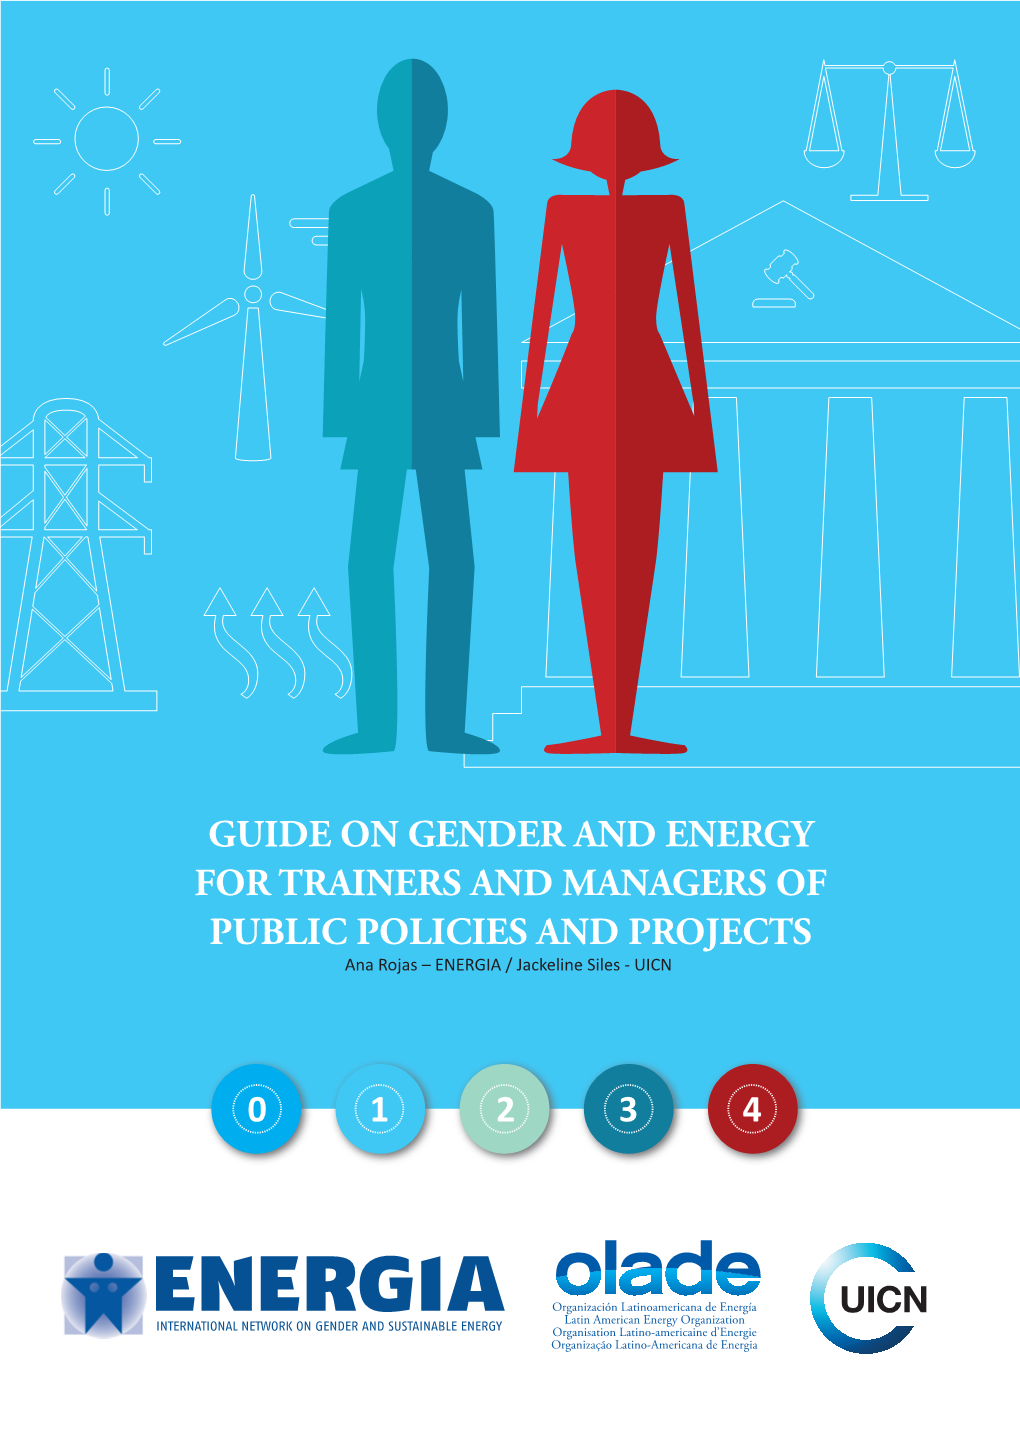 Guide on Gender and Energy for Trainers and Managers of Public